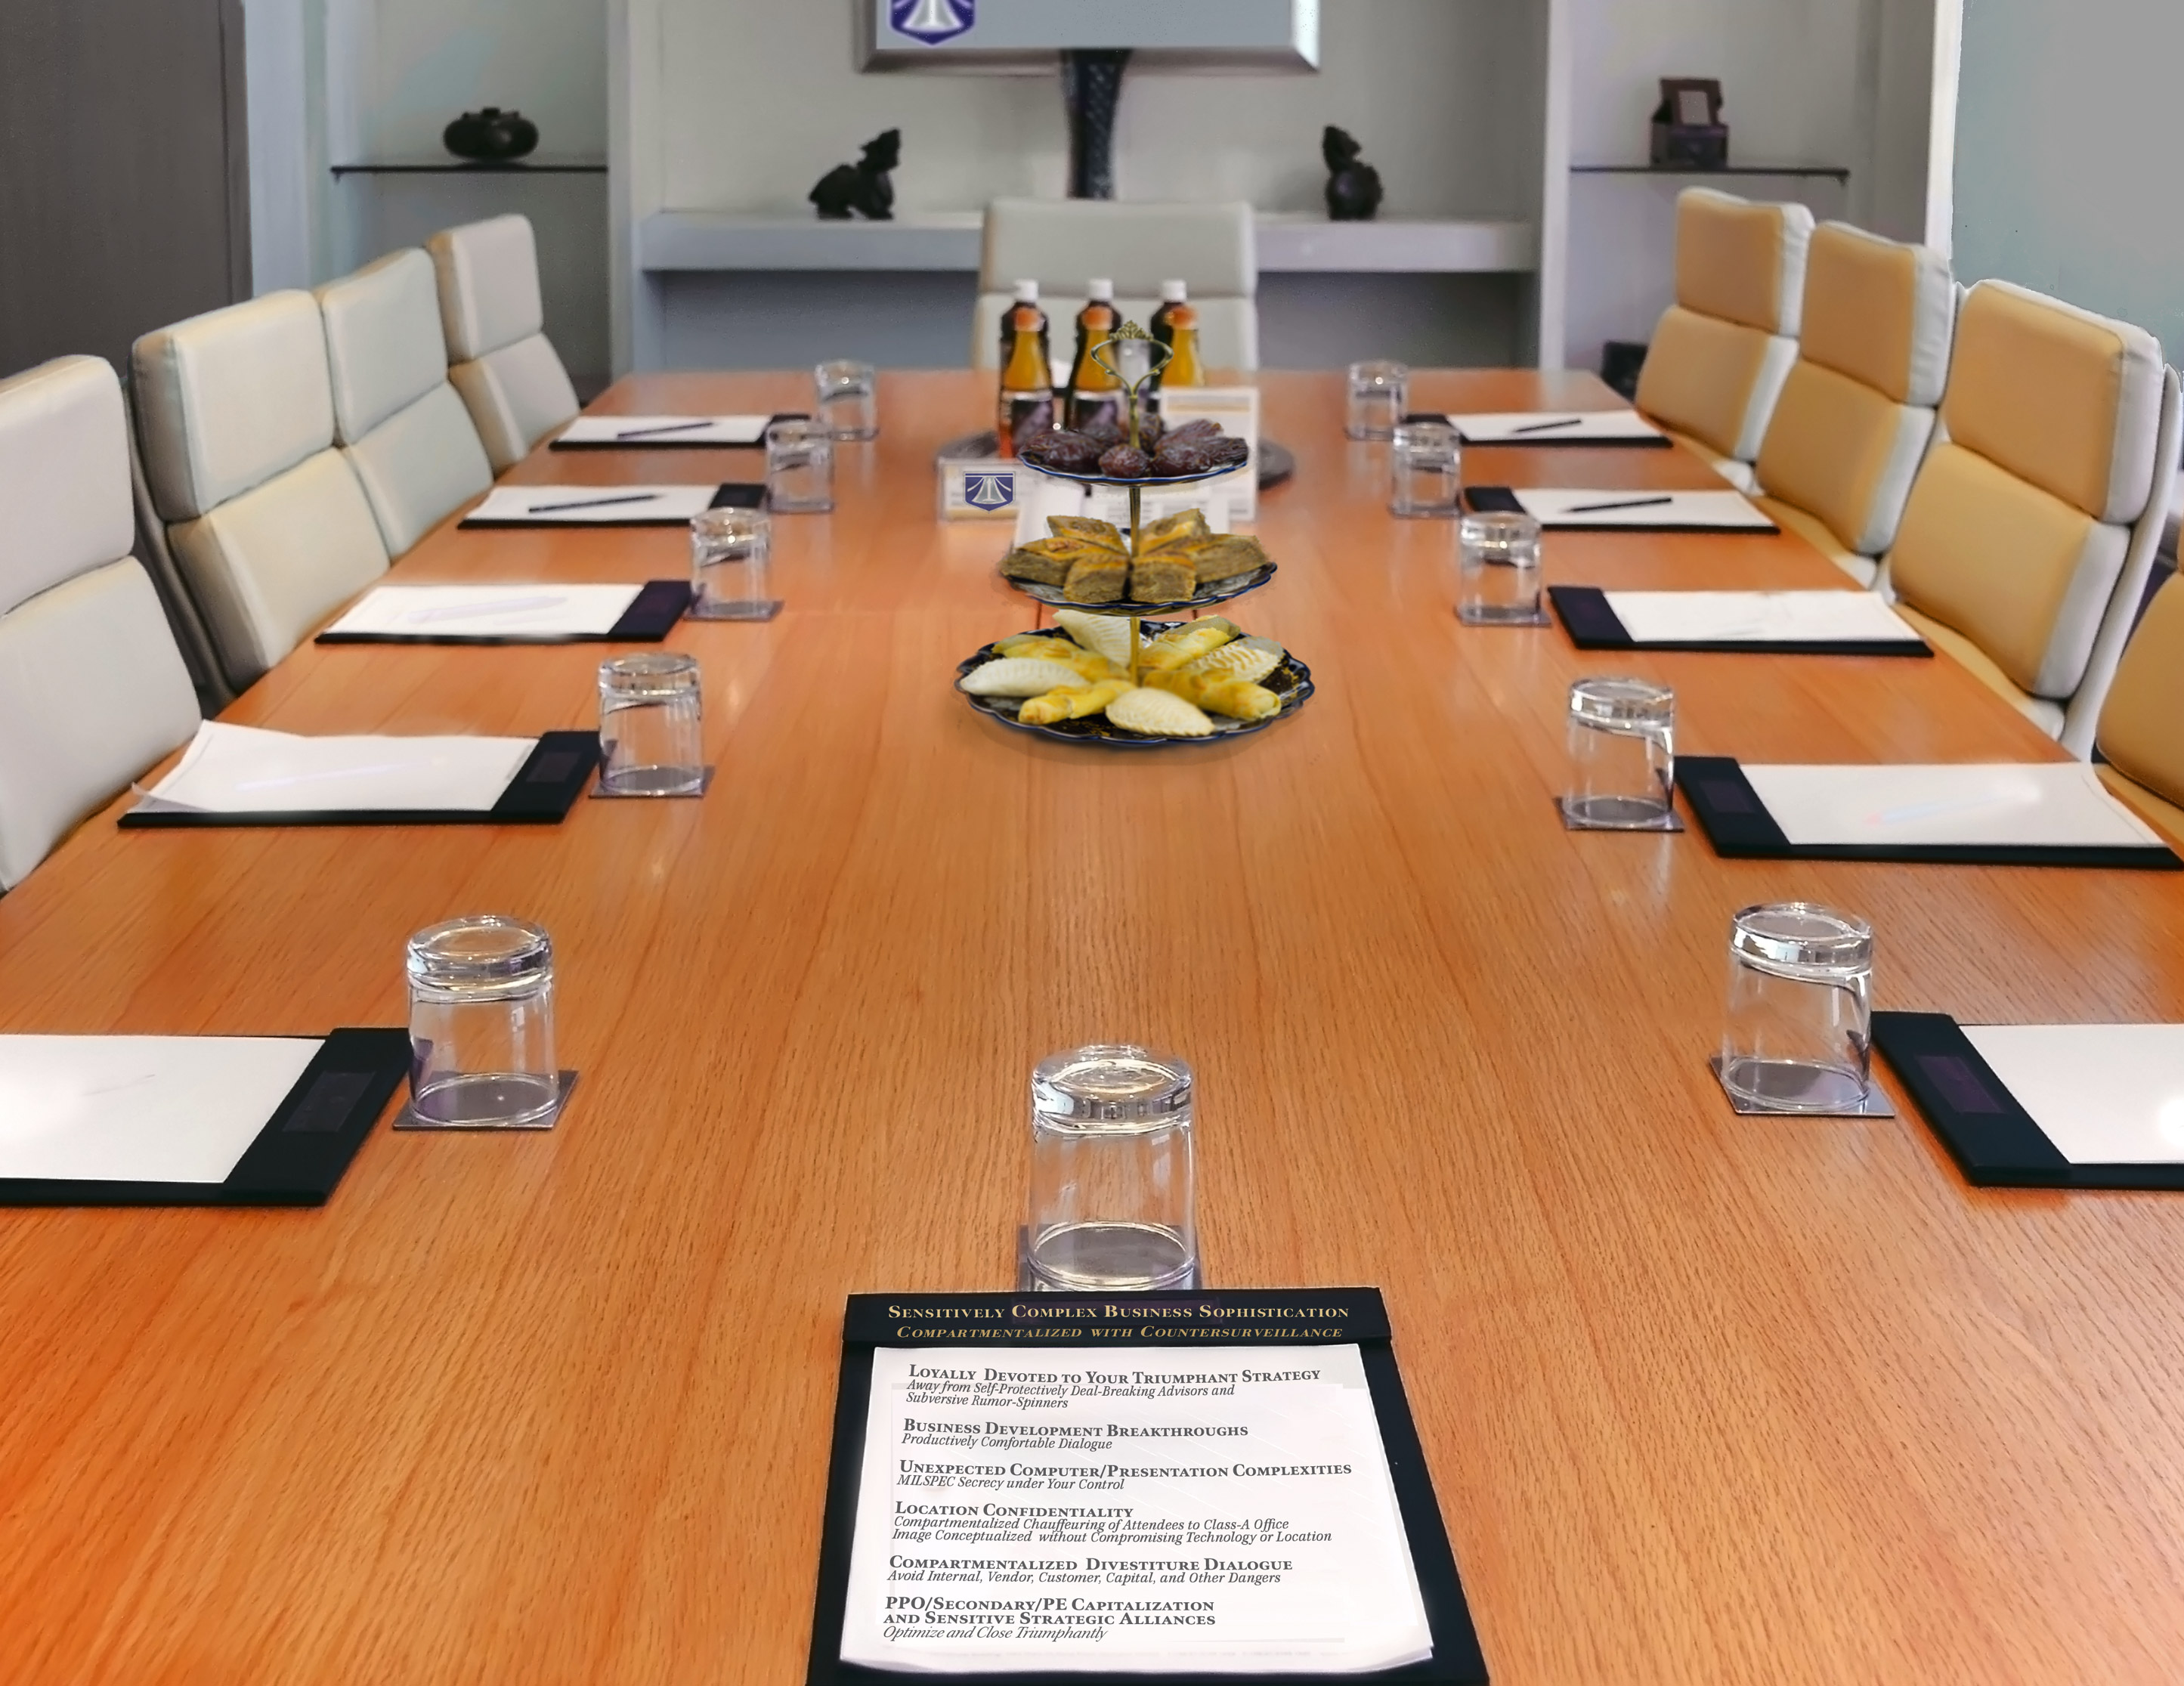 Covert Conference Room for Honorable Laissez-Faire Boardroom Meetings